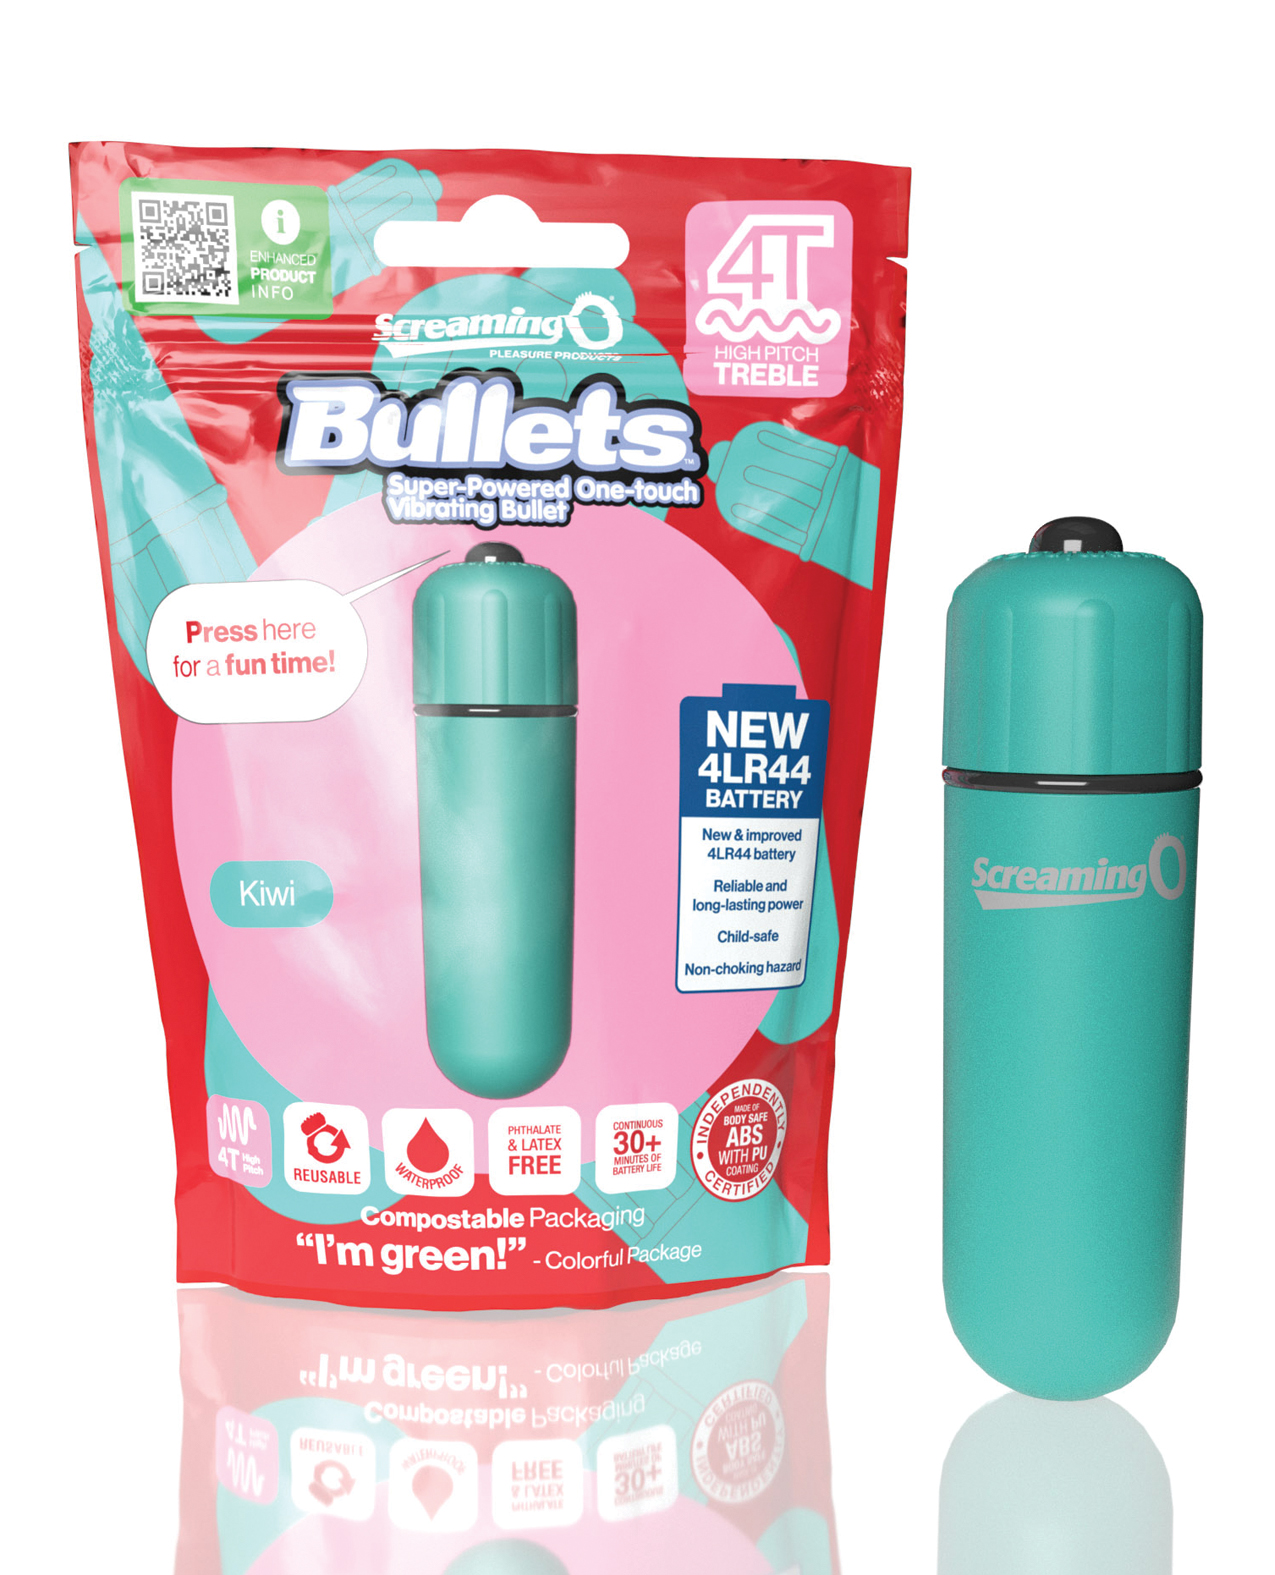 Teal bullet vibe standing next to the pink, red, and teal Screaming O packaging